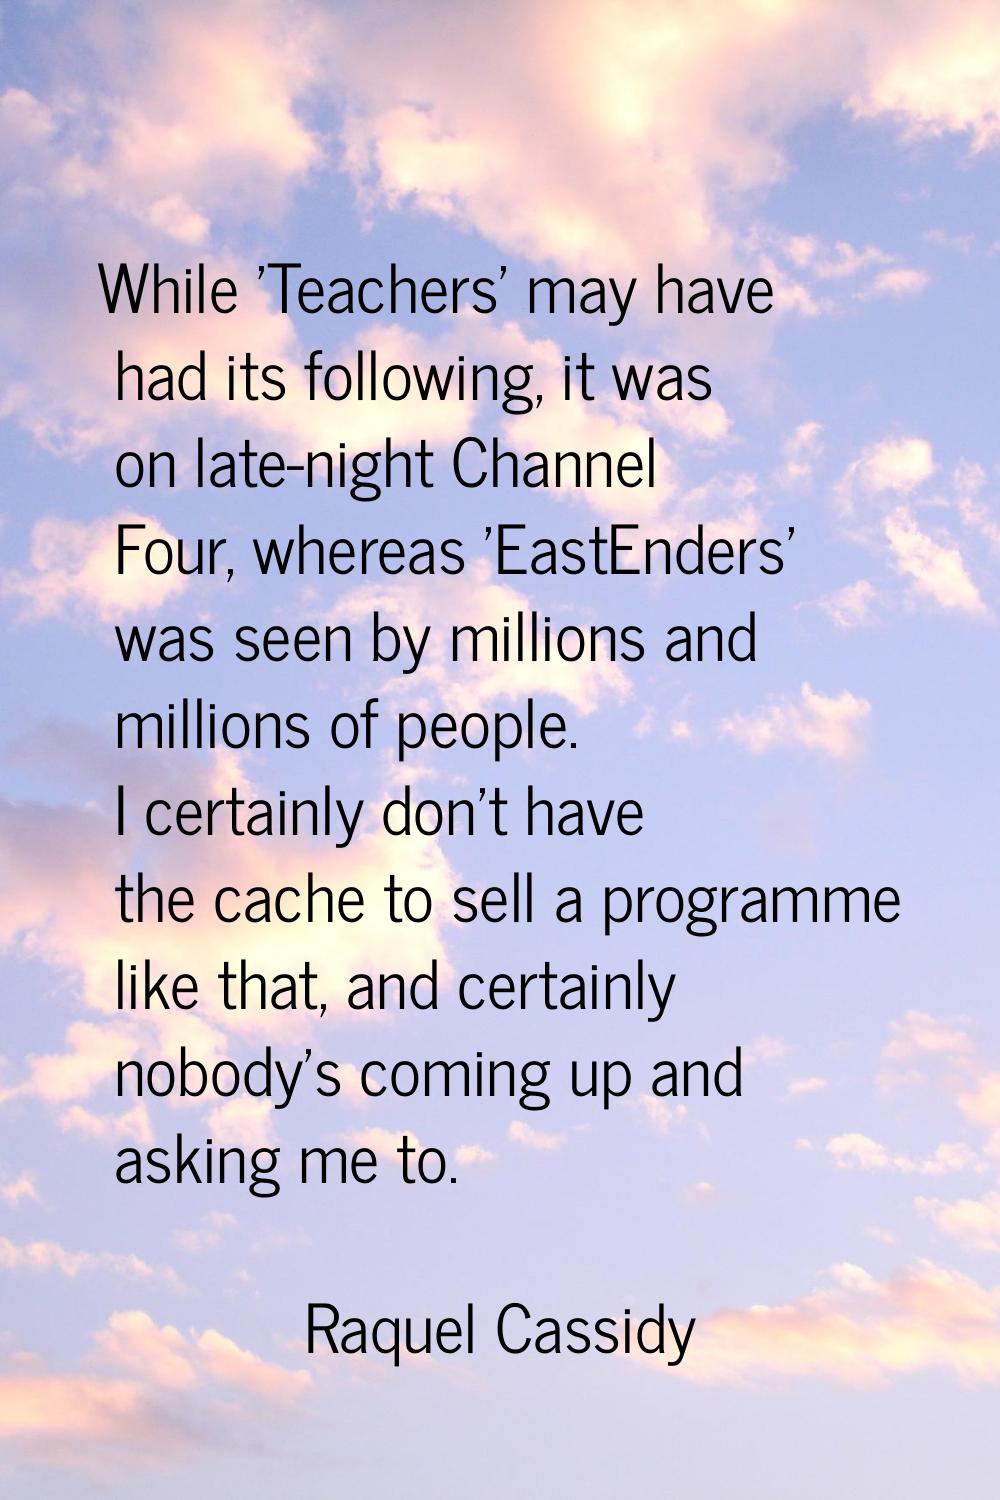 While 'Teachers' may have had its following, it was on late-night Channel Four, whereas 'EastEnders